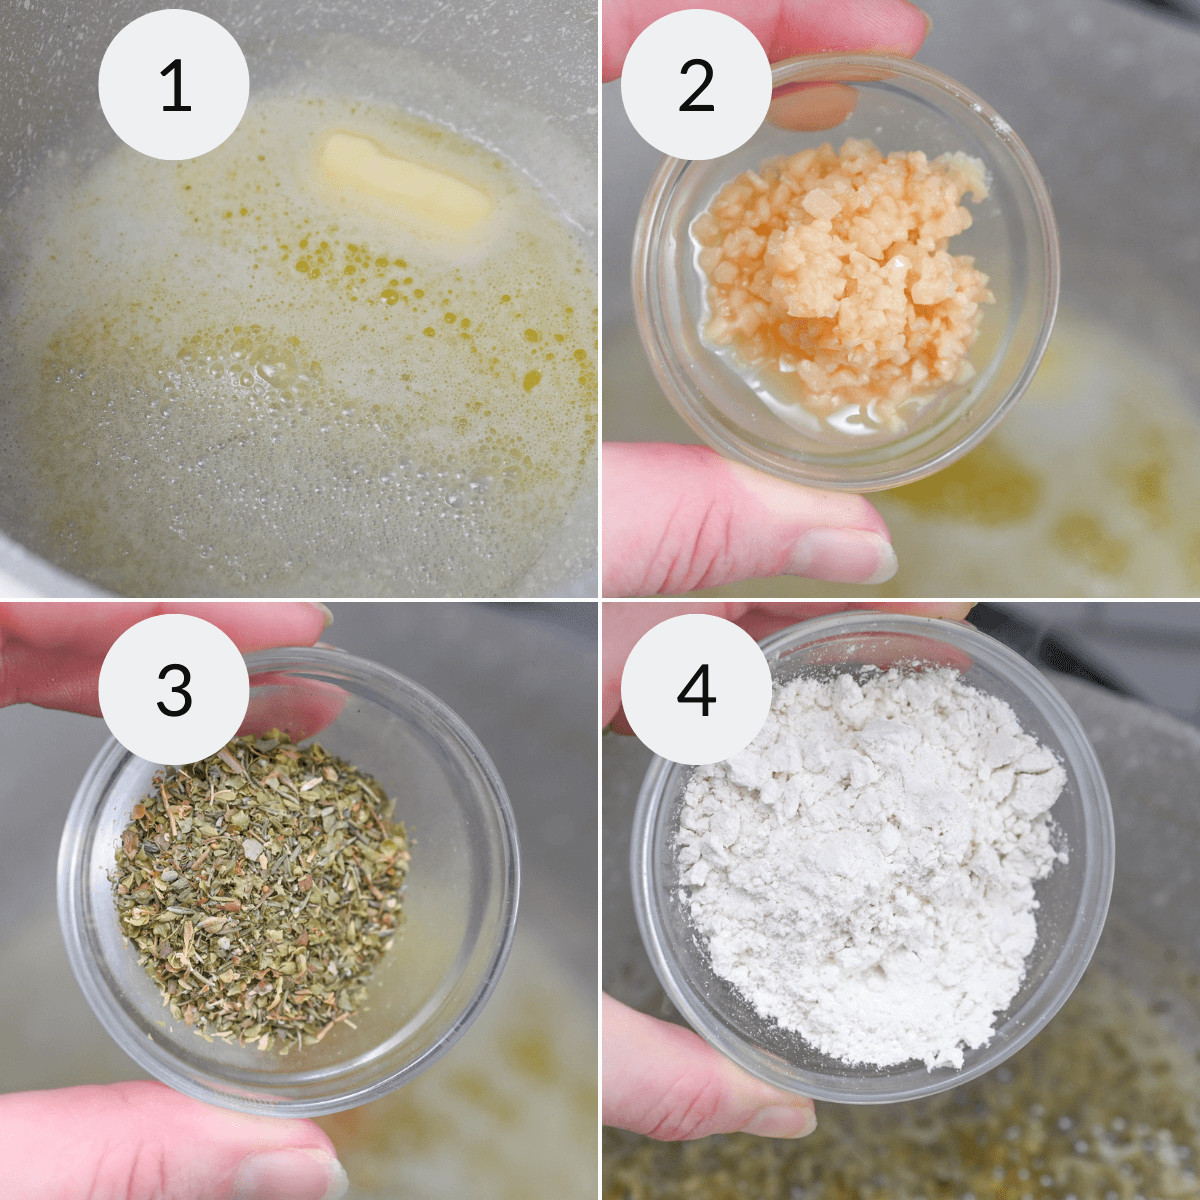 A four-part image showcasing ingredients for garlic parmesan sauce: 1) butter melting in a pot, 2) minced garlic in a bowl, 3) mixed dried herbs in a bowl